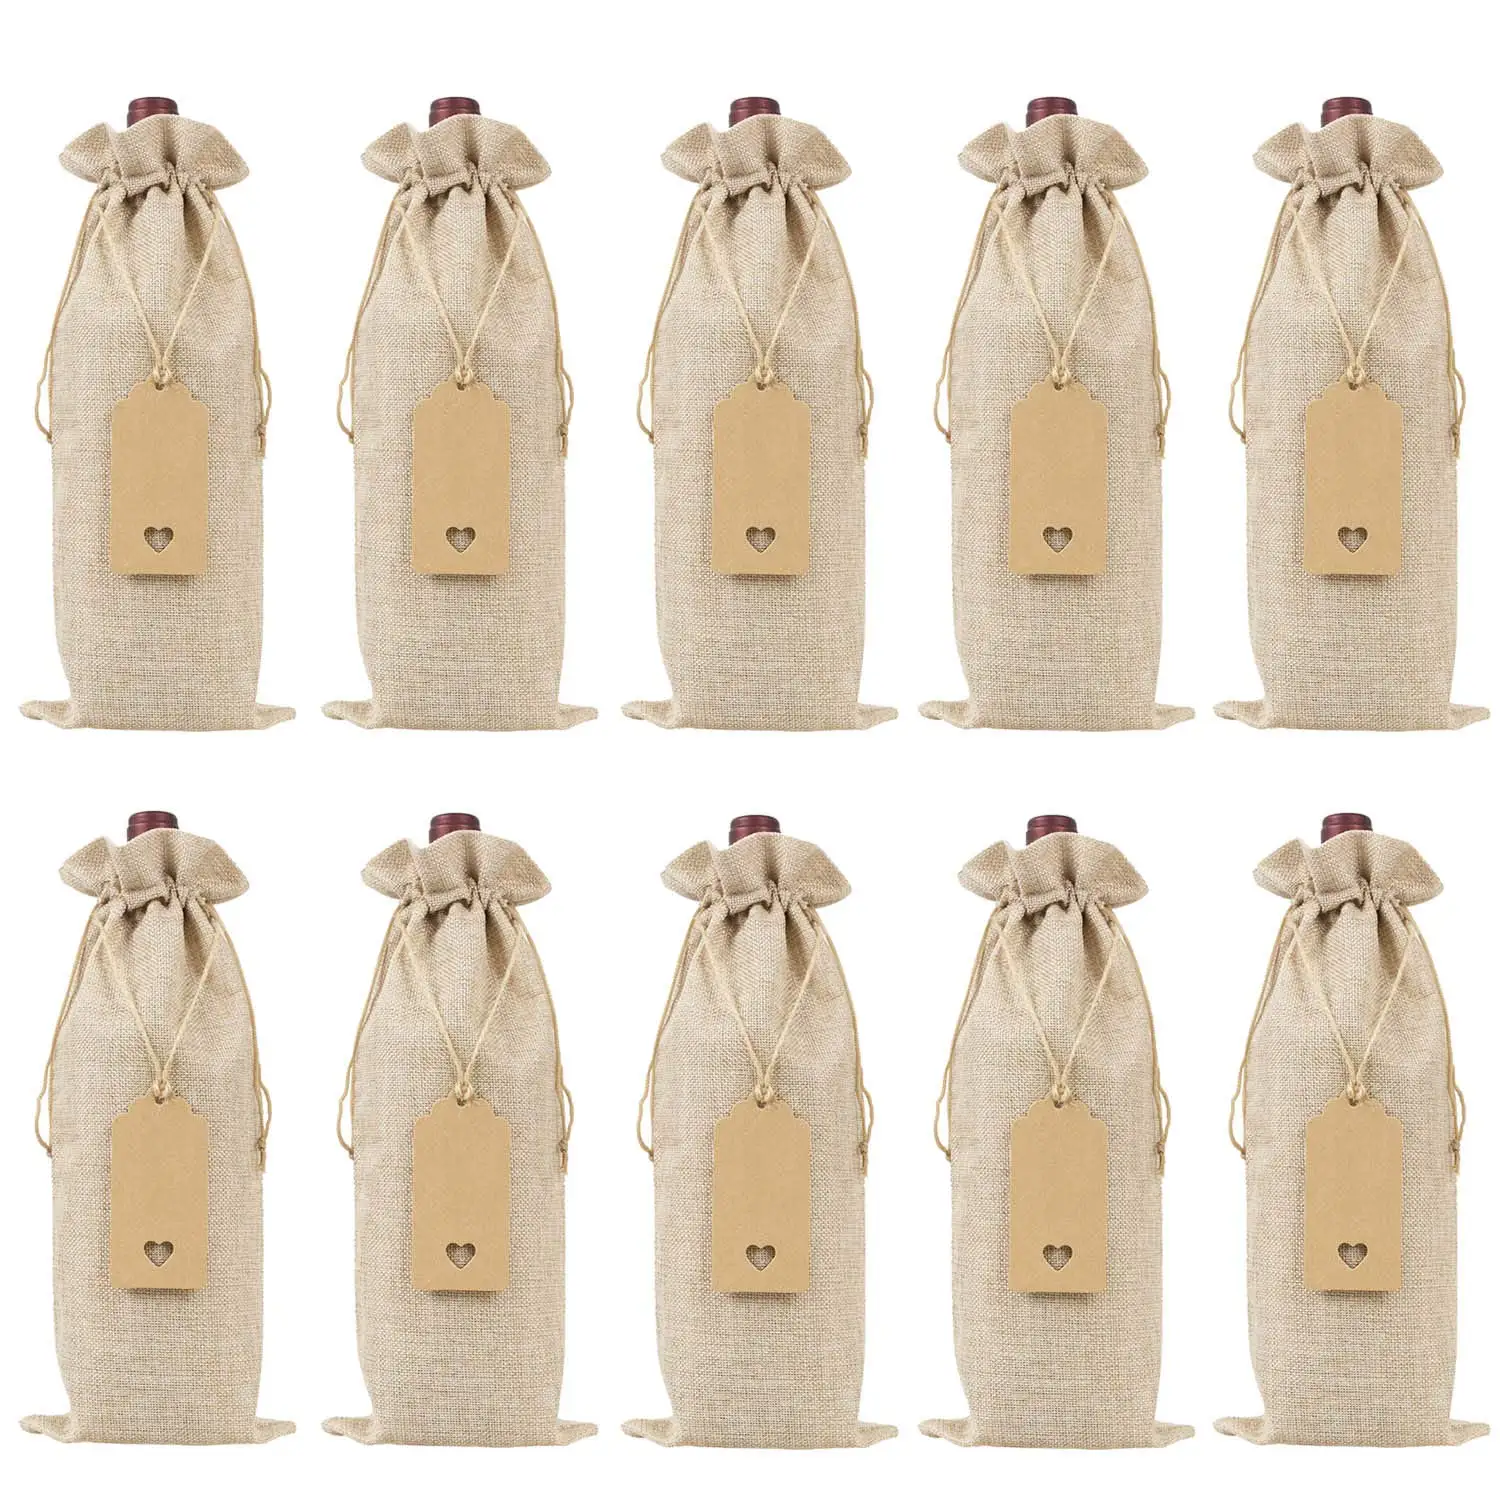 

Burlap Wine Bags Wine Gift Bags with Drawstrings, Single Reusable Wine Bottle Covers with Ropes and Tags (10 Pcs)